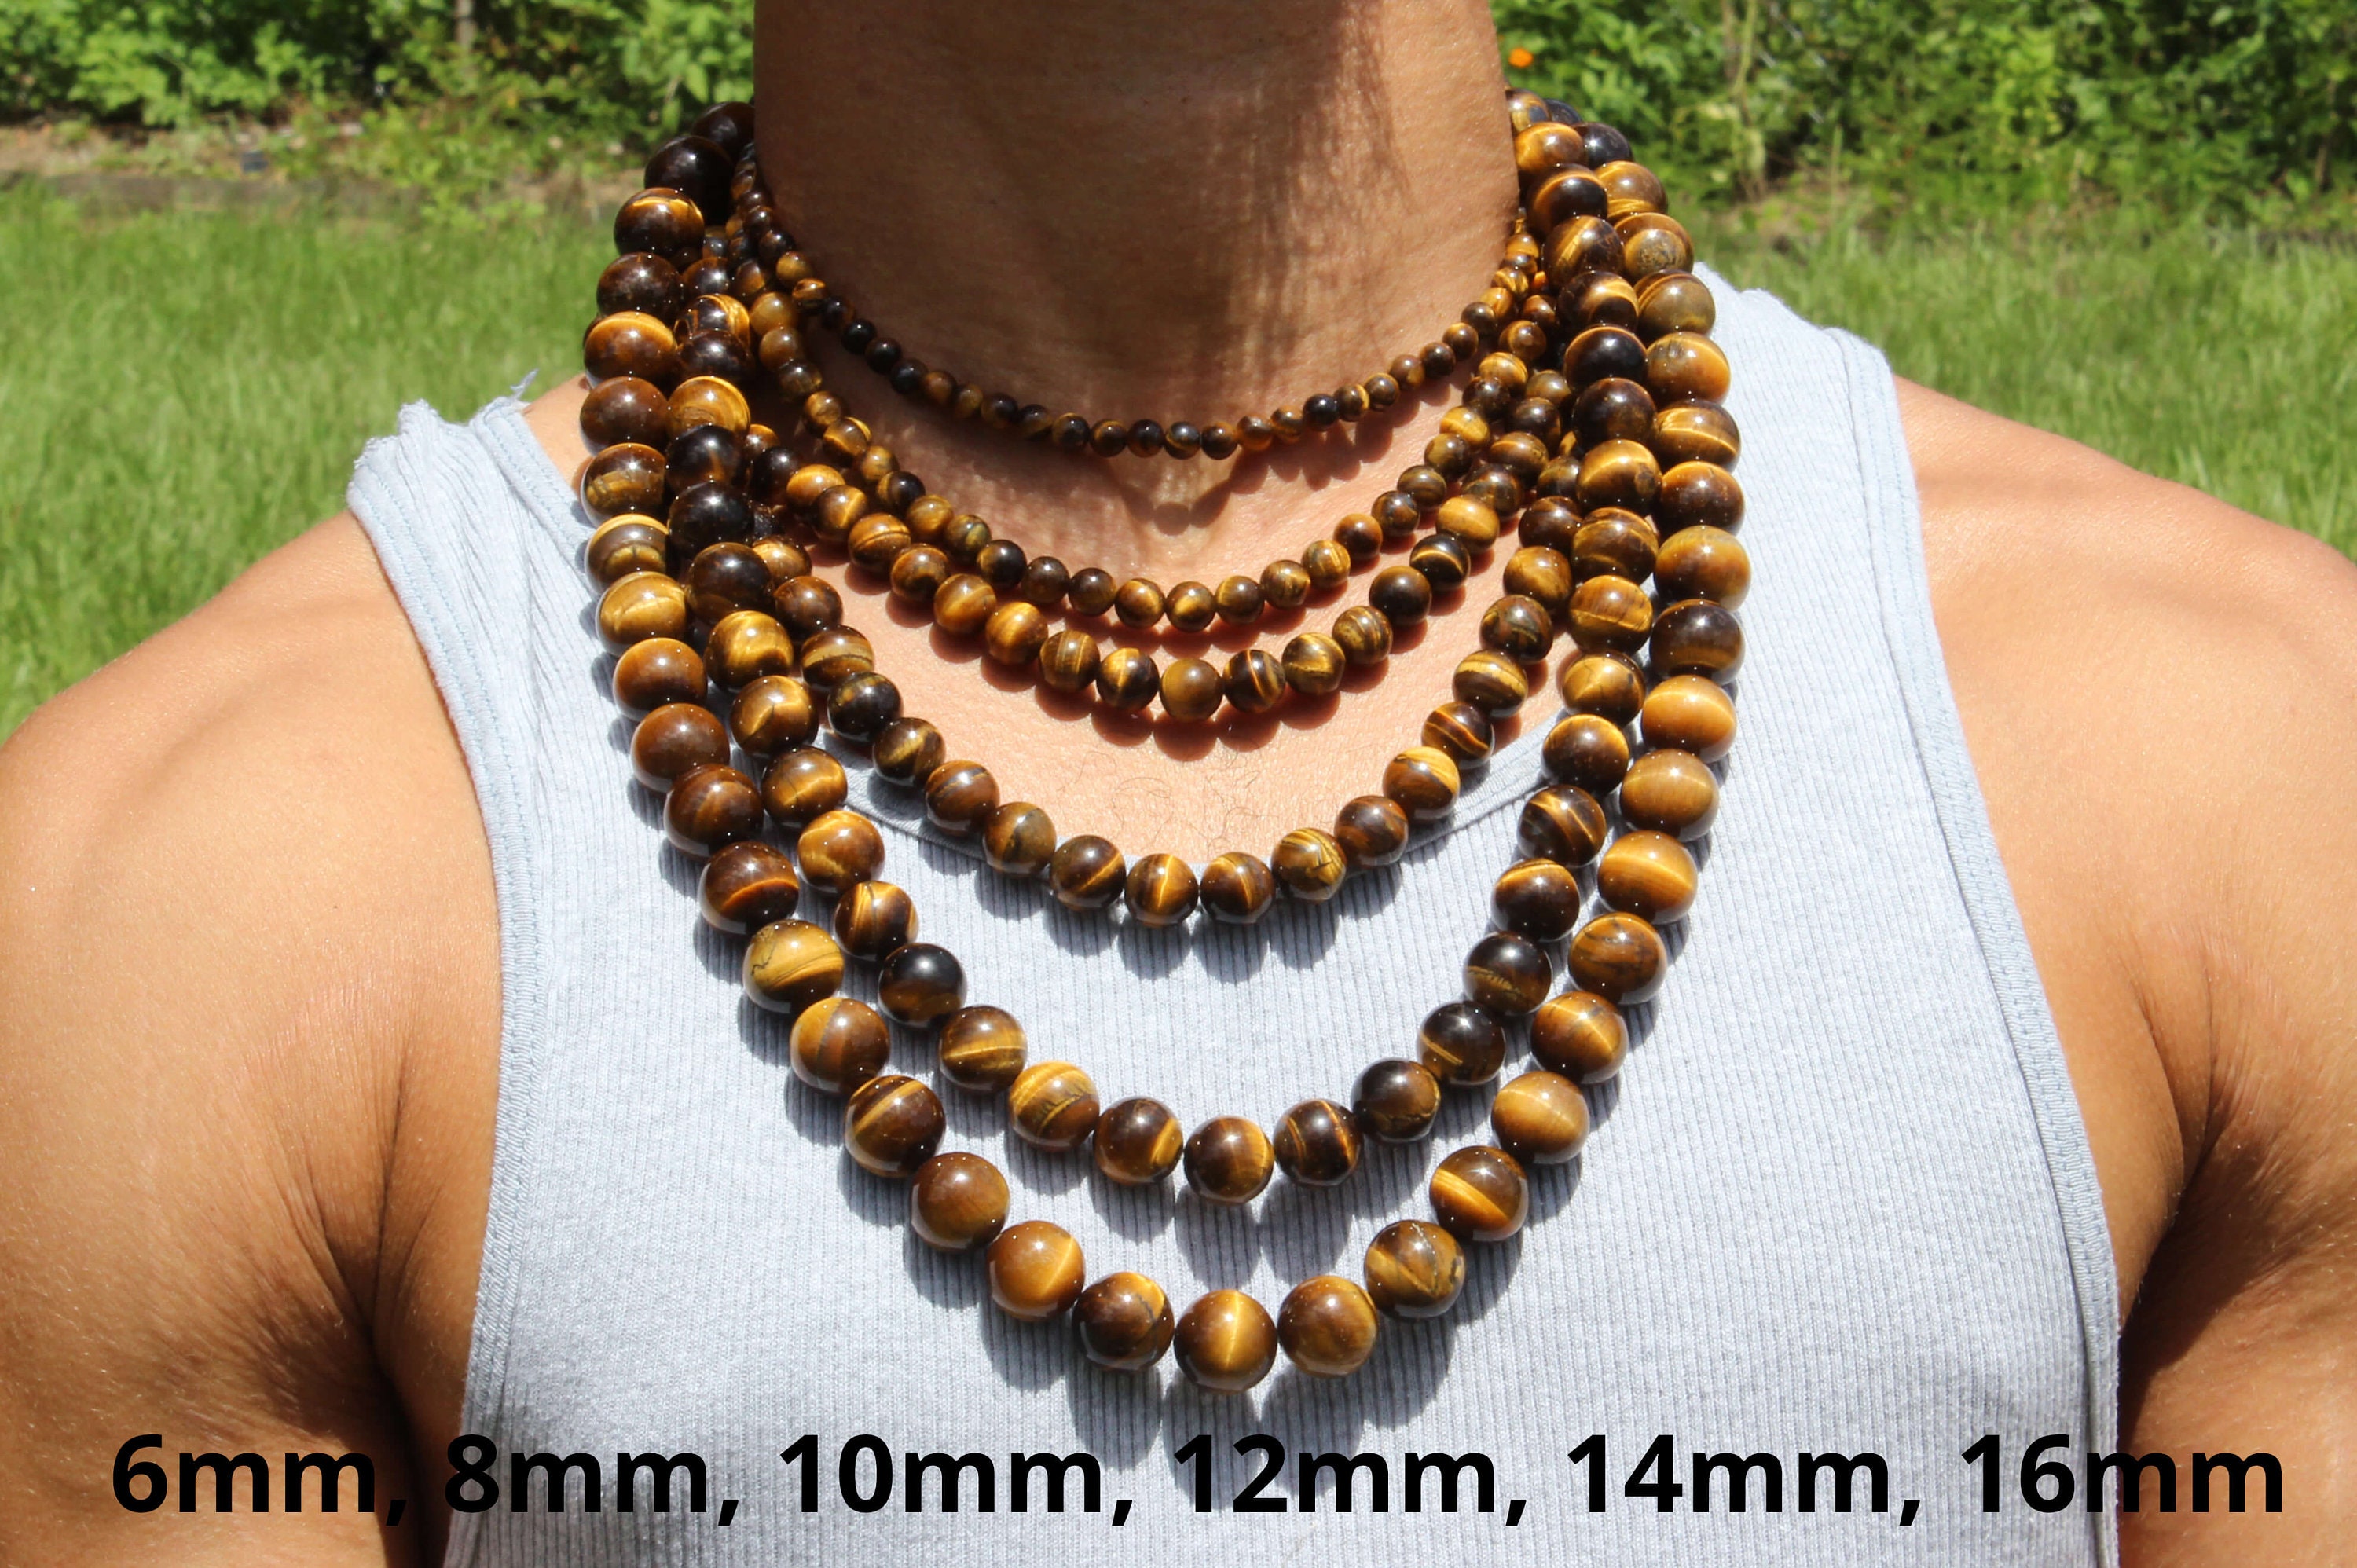 134.9 grams Rare Unusual Natural Tigers Eye Beads NECKLACE - model  #1-lis-21-5